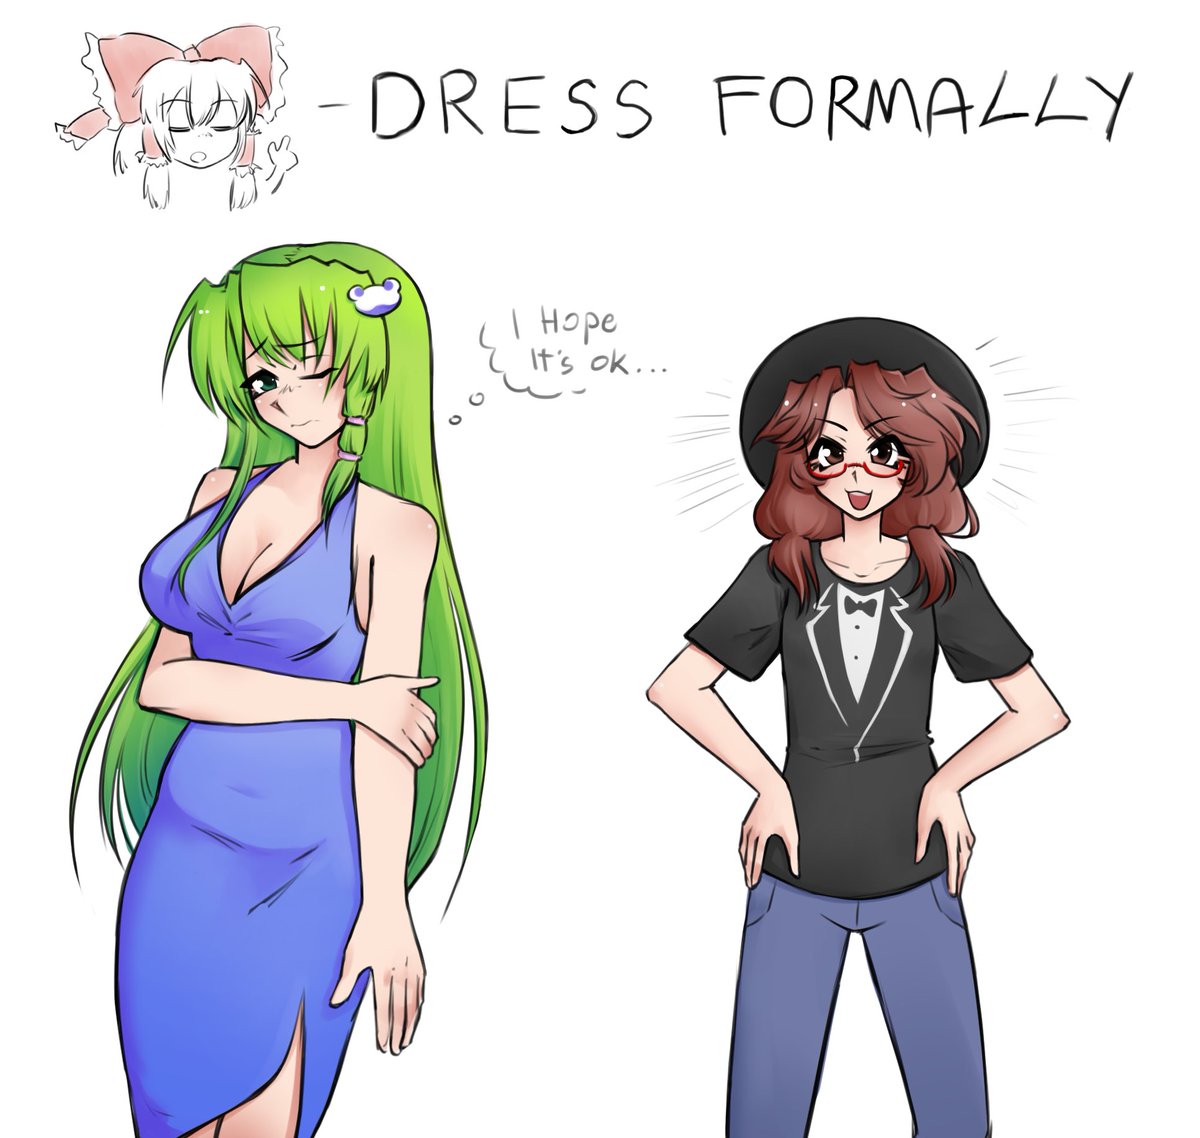 Sanae and Sumireko have to dress formally…